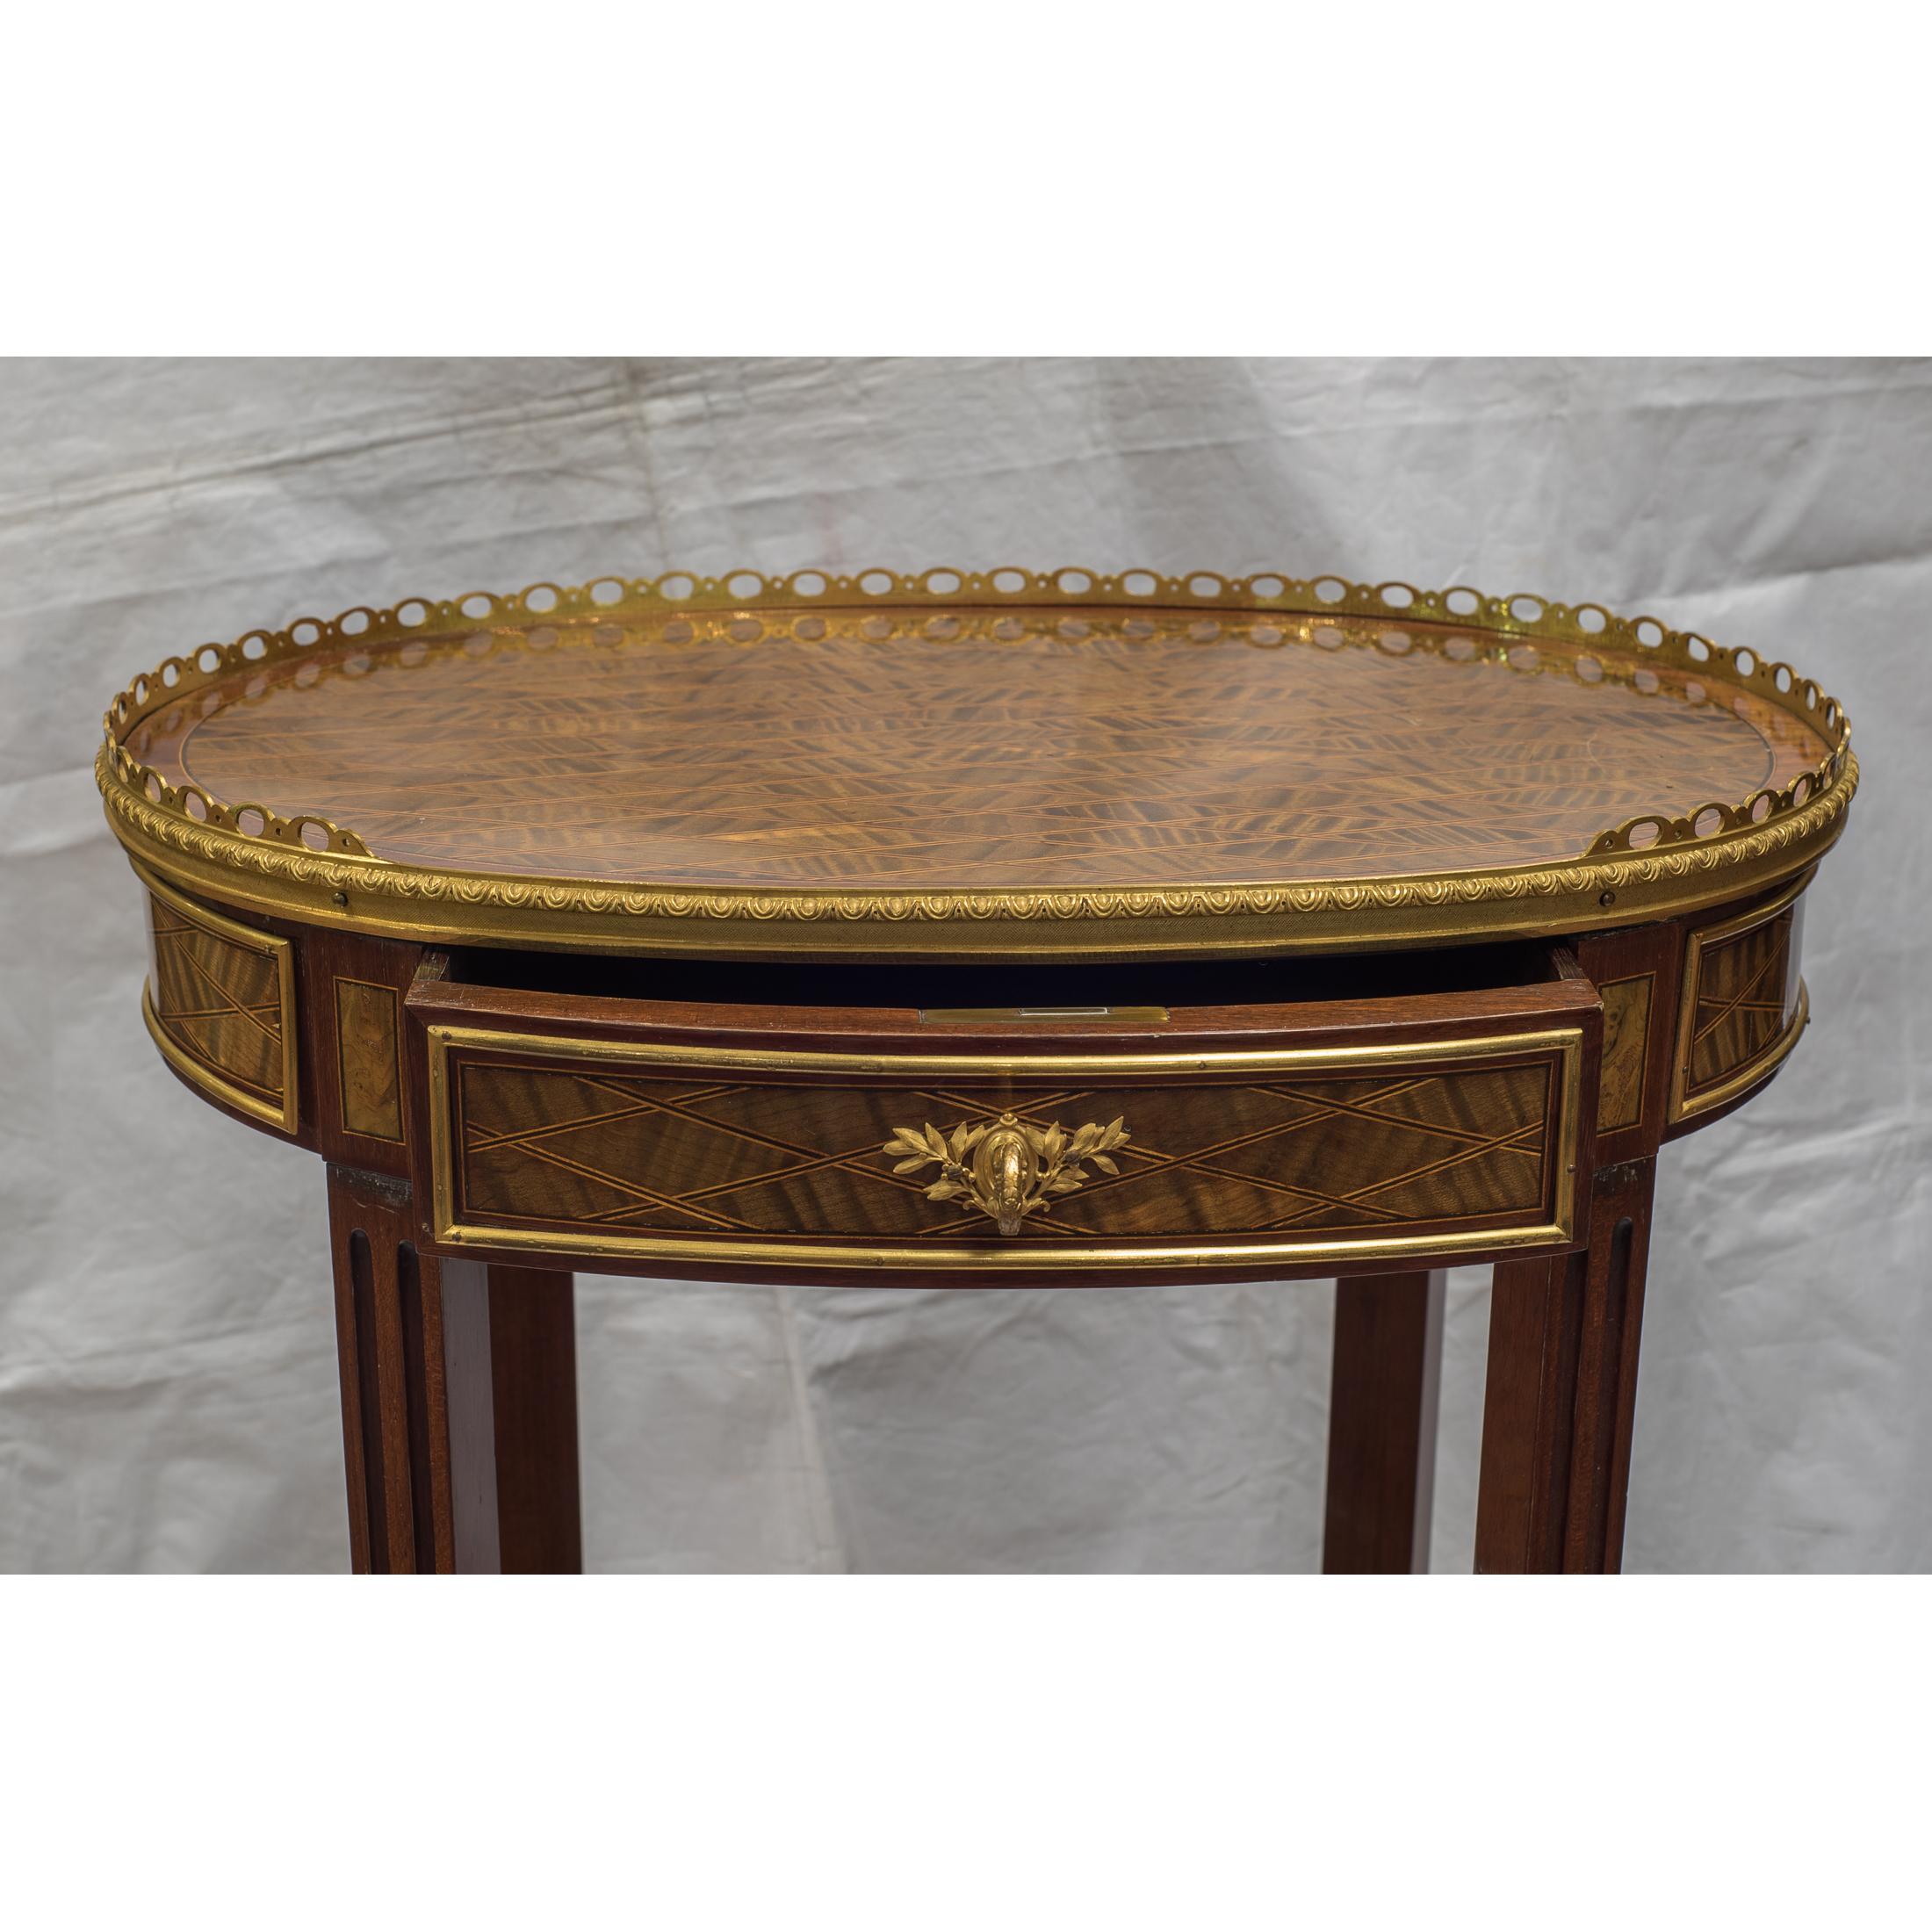 Louis XV-Style Ormolu-Mounted Inlaid Tulipwood and Mahogany Galleried Oval Table In Good Condition For Sale In New York, NY